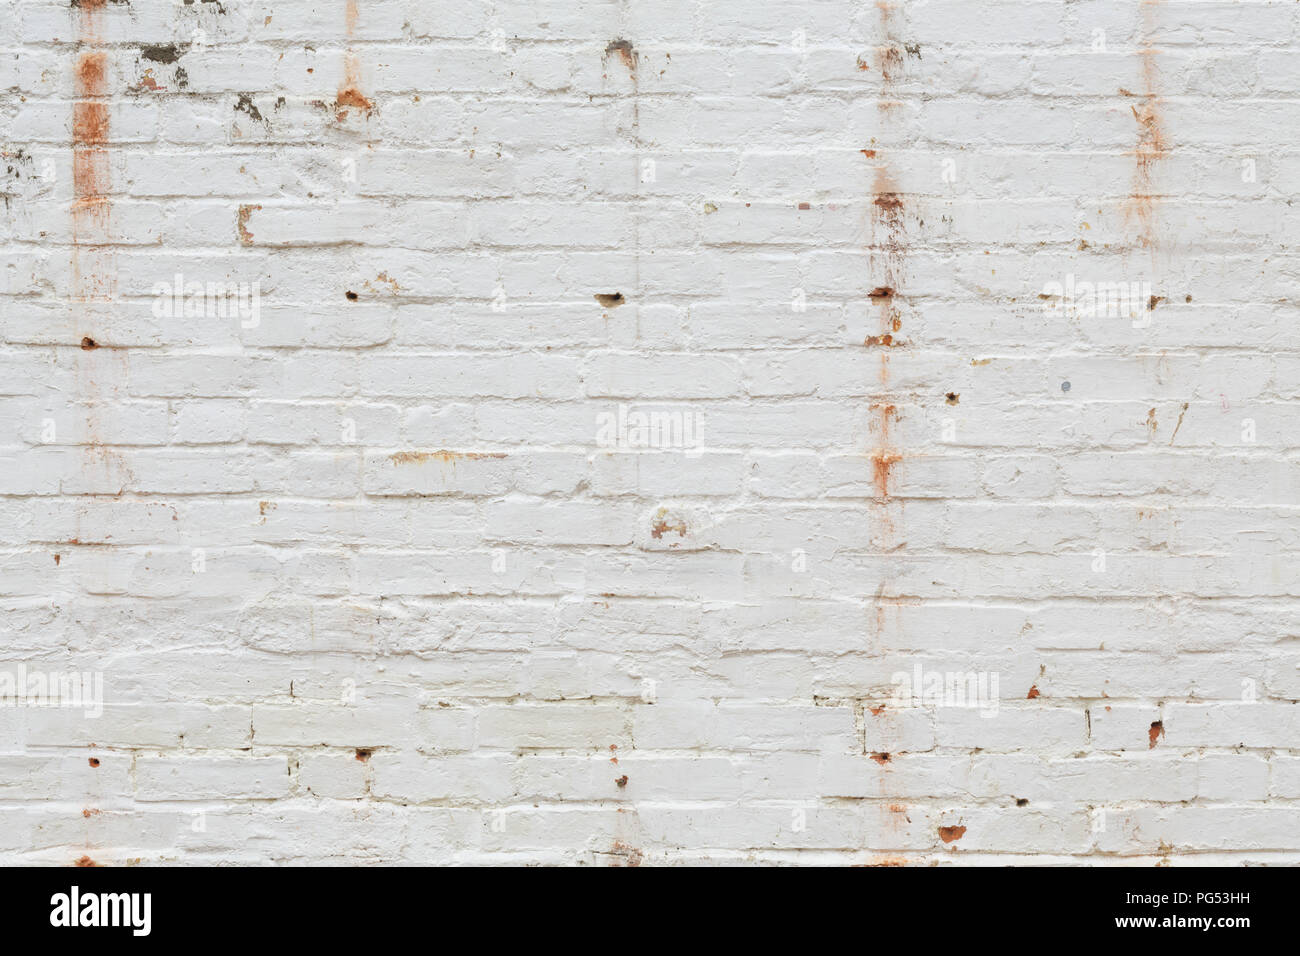 Detail of old brick wall painted white and distressed, peeling and stained. Ideal for grunge background texture Stock Photo